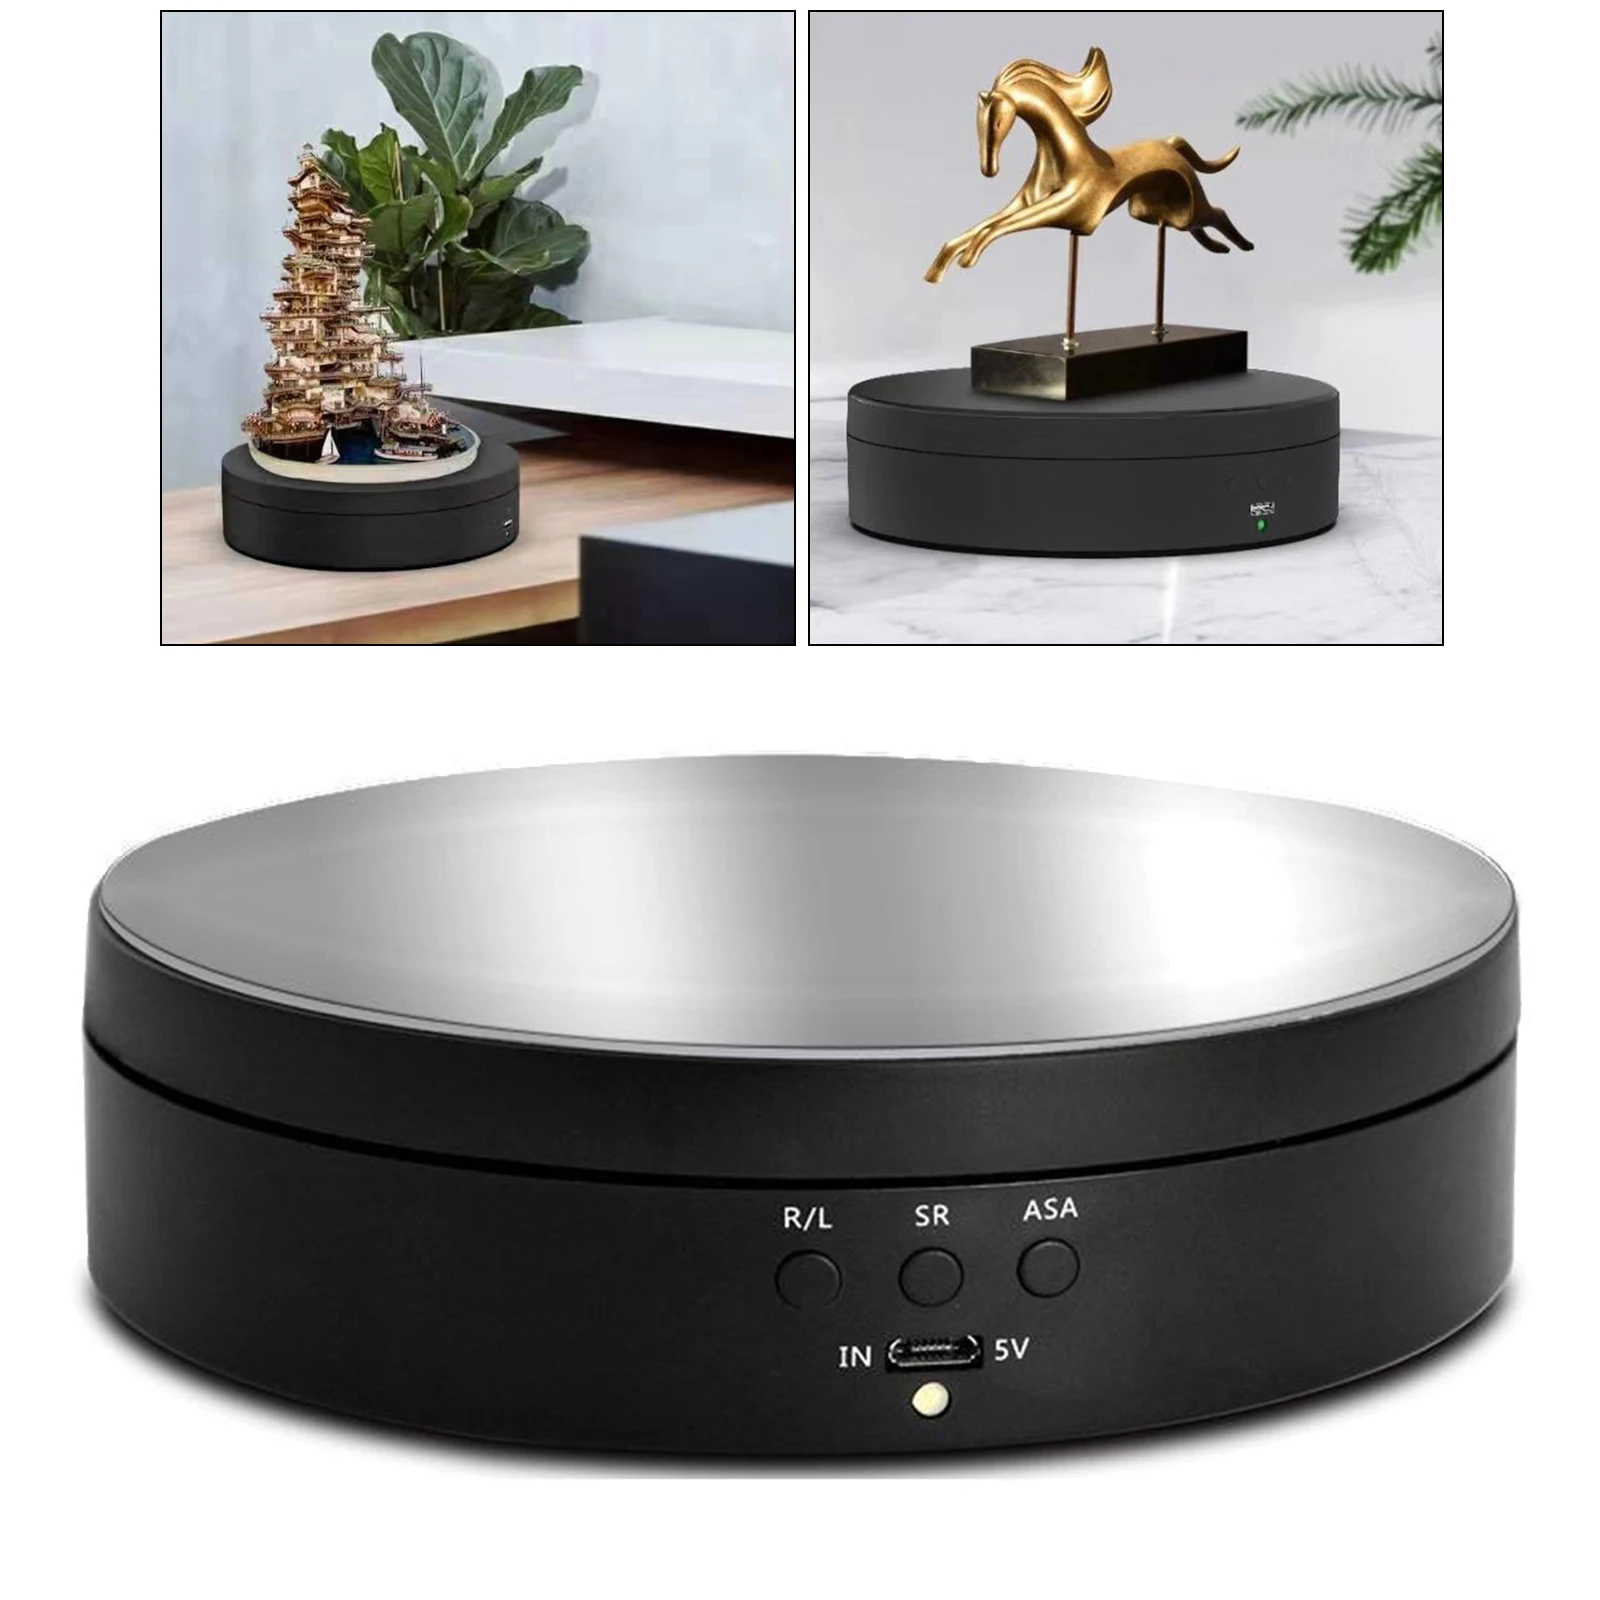 360 Degree Rotating Display Stand Turntable Photography Display 3 Speed for Cake Doll Jewelry Exhibition